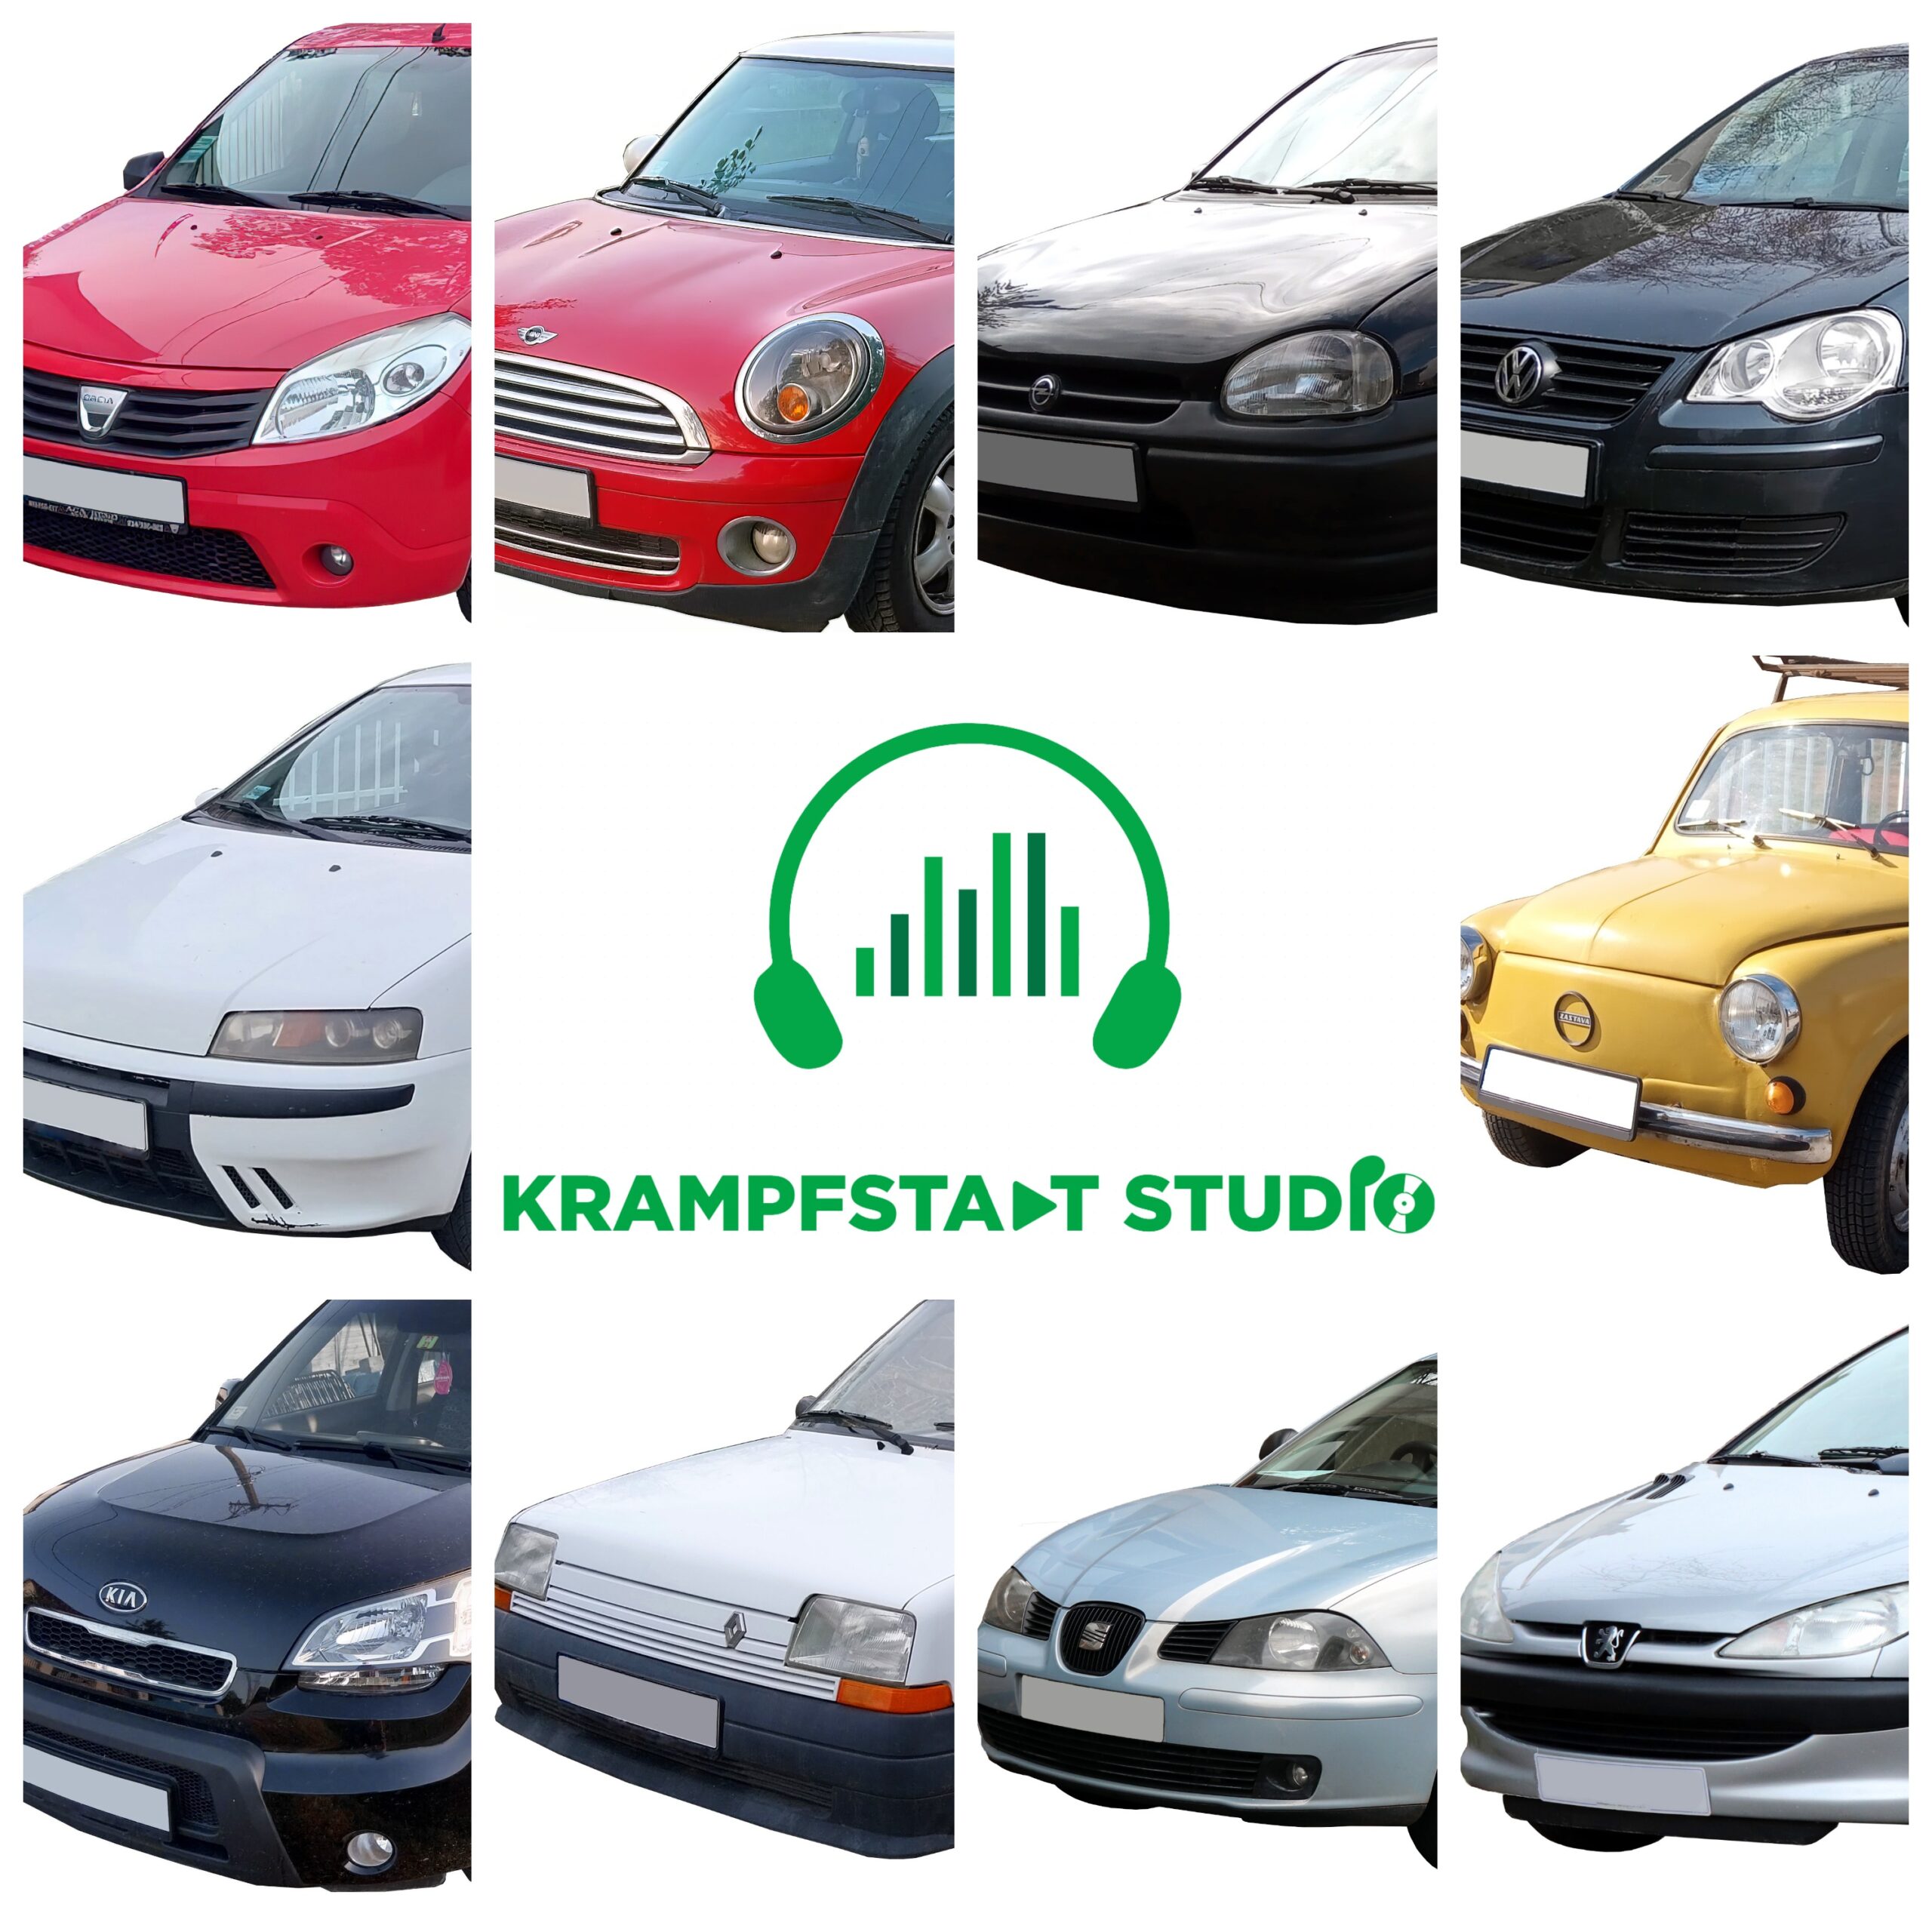 The image portrays a collage of various cars, creatively embedded with the words 'kramstad studio', providing a visual representation of a sound effects library on Sonniss.